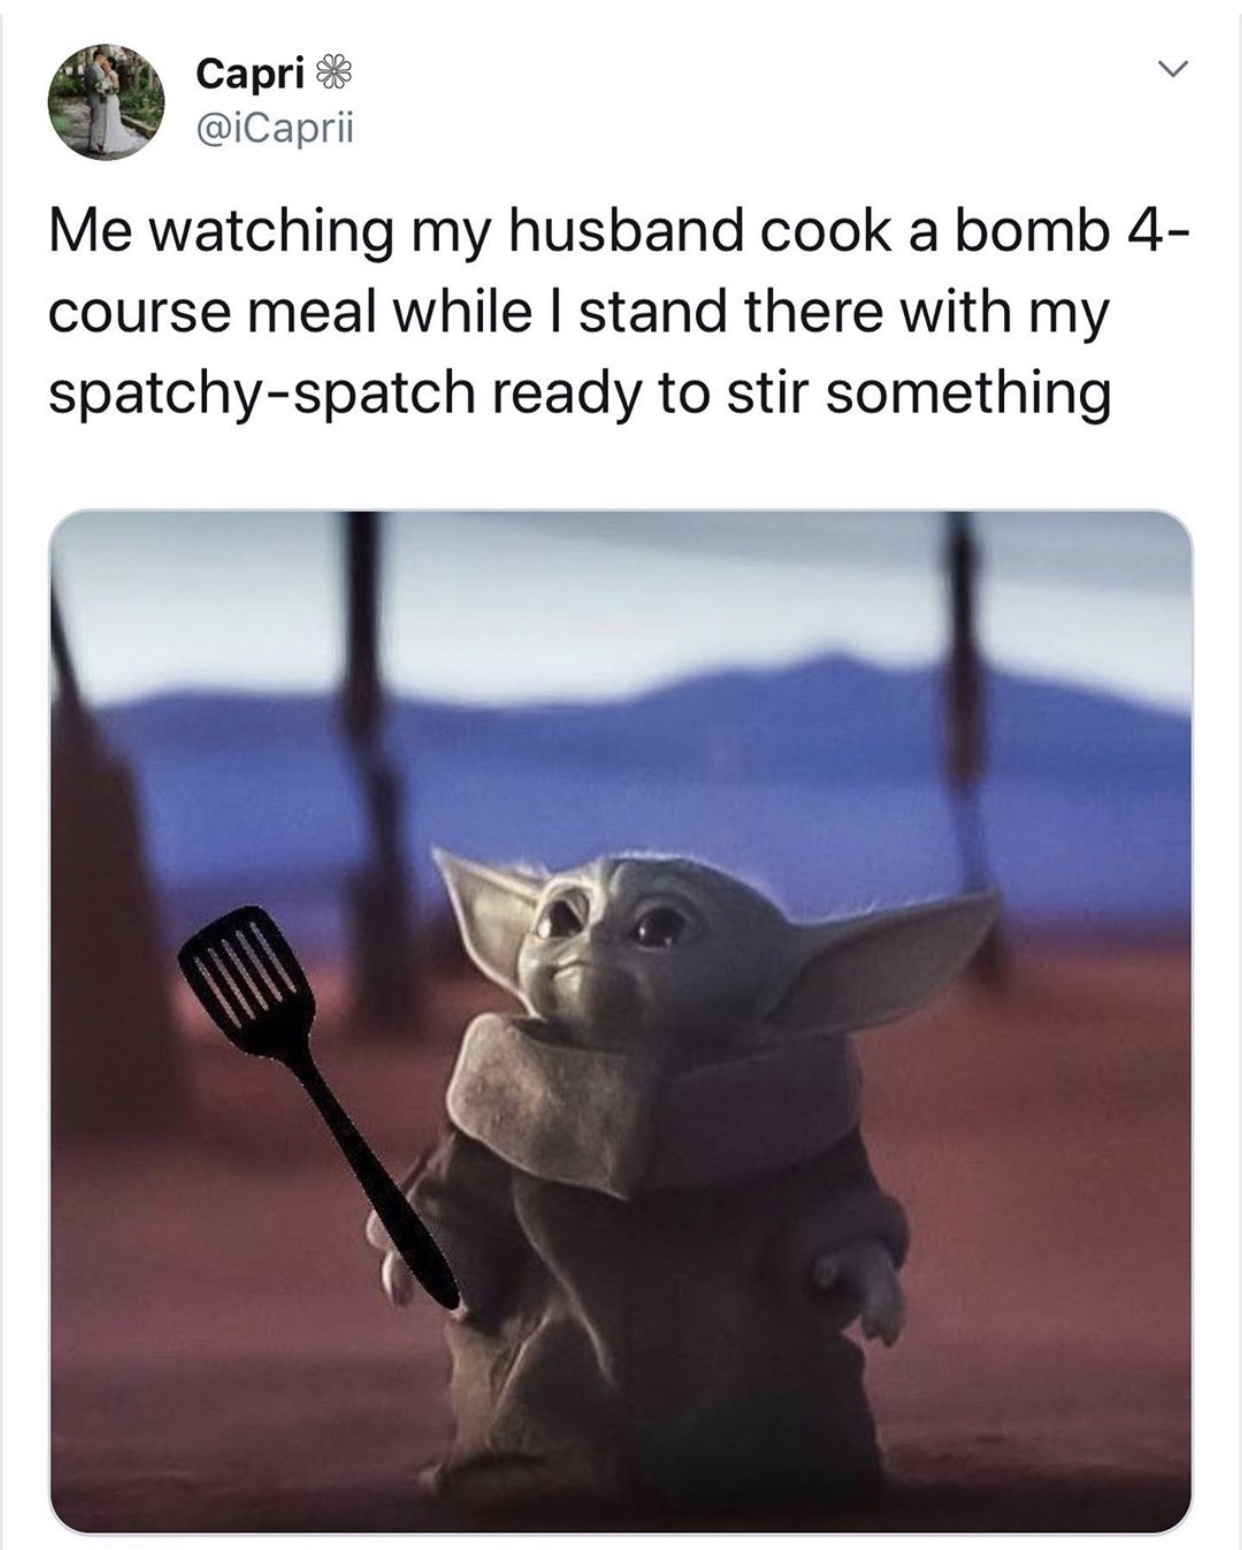 baby yoda memes pancakes - Capri H Me watching my husband cook a bomb 4 course meal while I stand there with my spatchyspatch ready to stir something